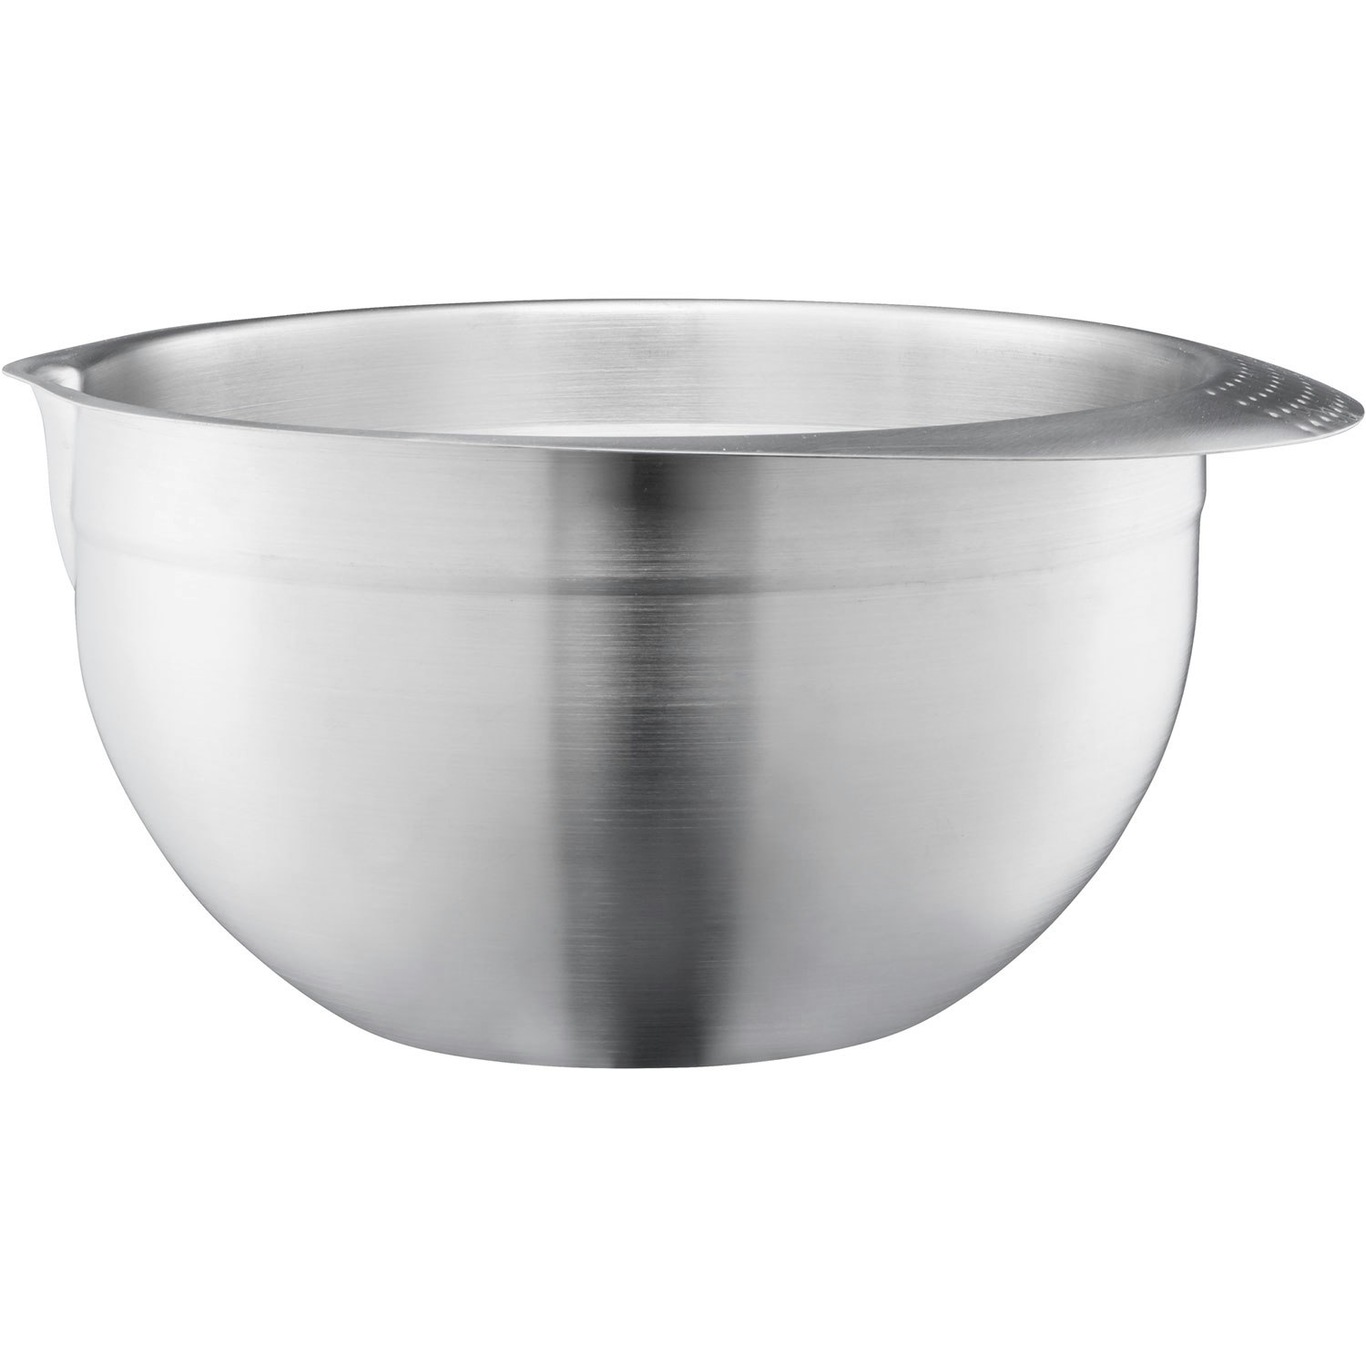 Bowl Stainless Steel, 4,8 L